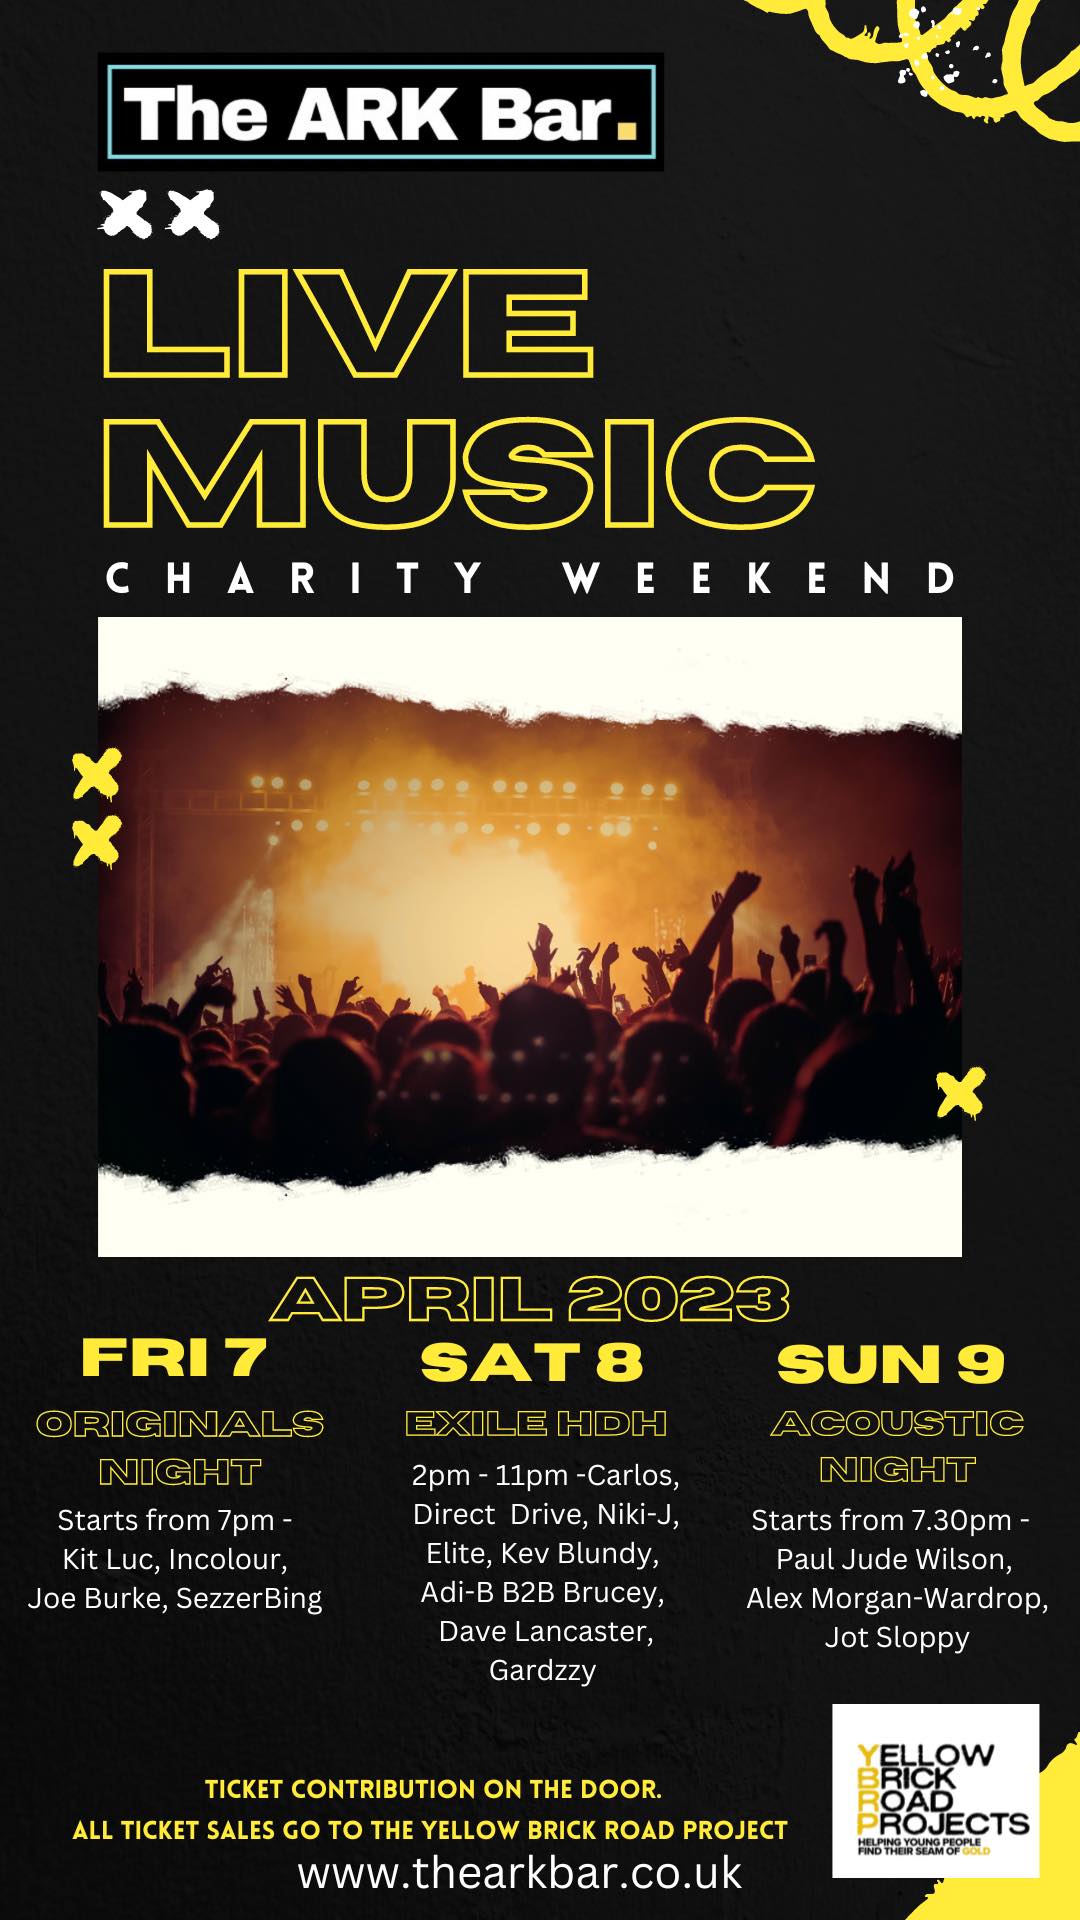 The ARK Bar Live Music Charity Weekend - SUNDAY: ACOUSTIC NIGHT